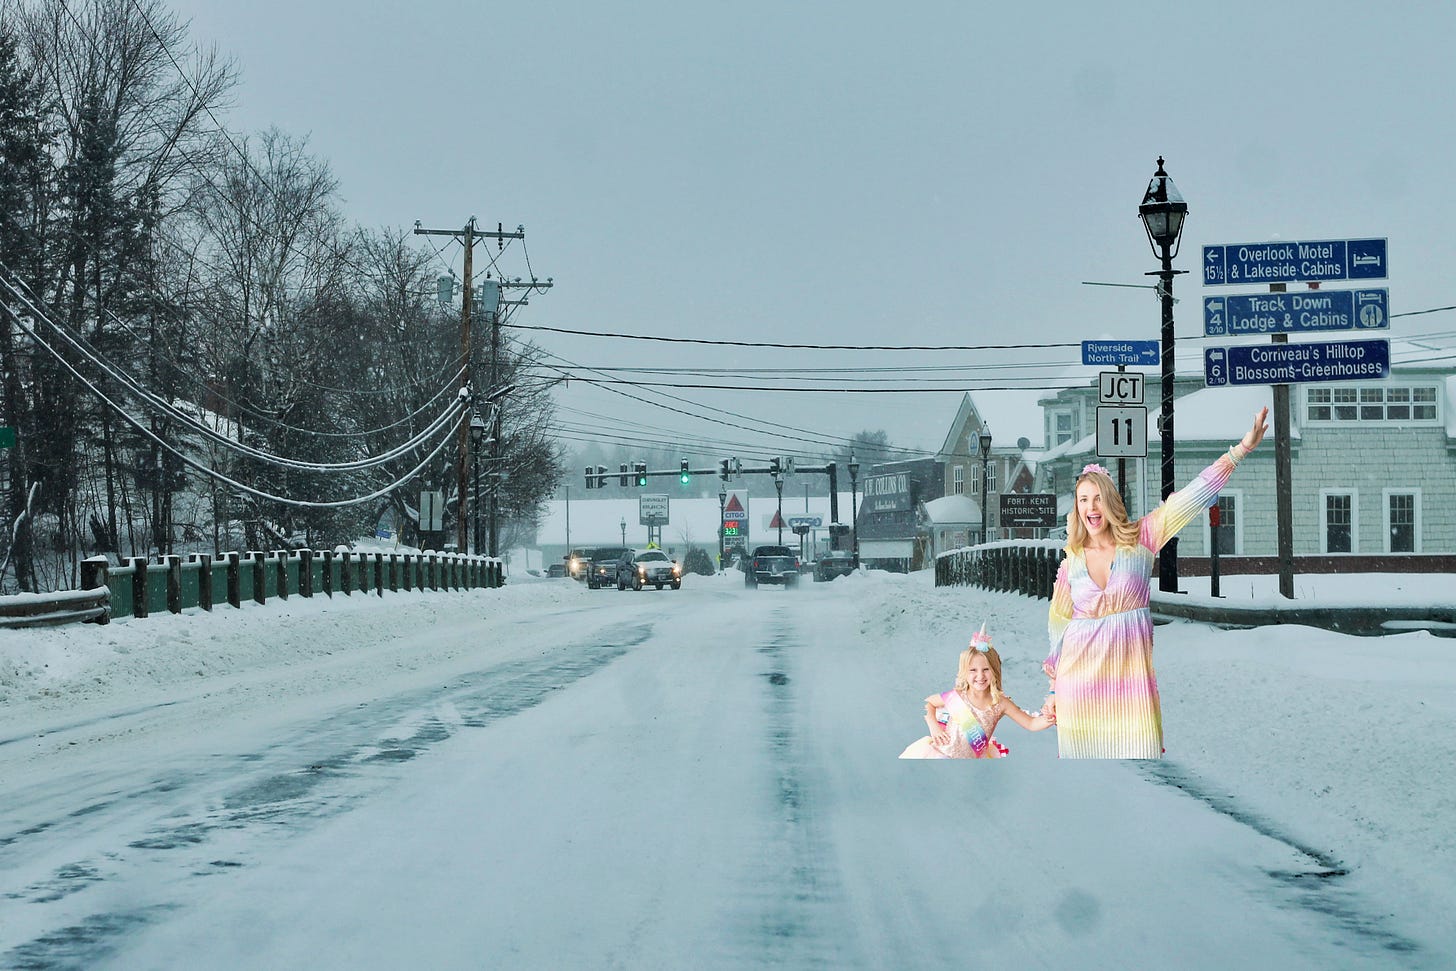 A picture of Fort Kent, Maine, with a California mom and her child in their over-extravagant toddler birthday attire photoshopped into the scene to see what it would look like if they visited Fort Kent, Maine during the winter.